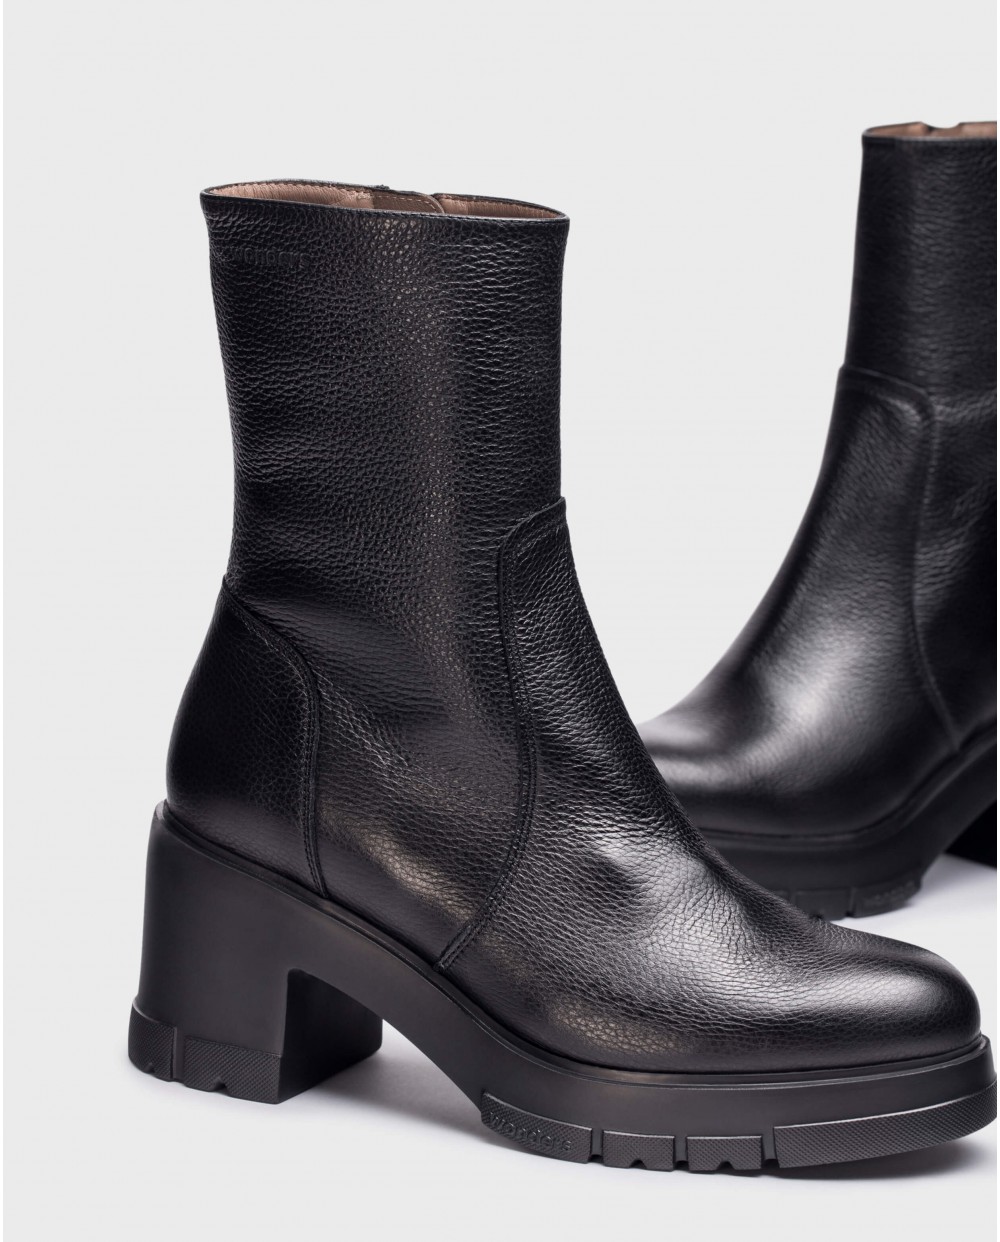 Black combat leather ankle boot